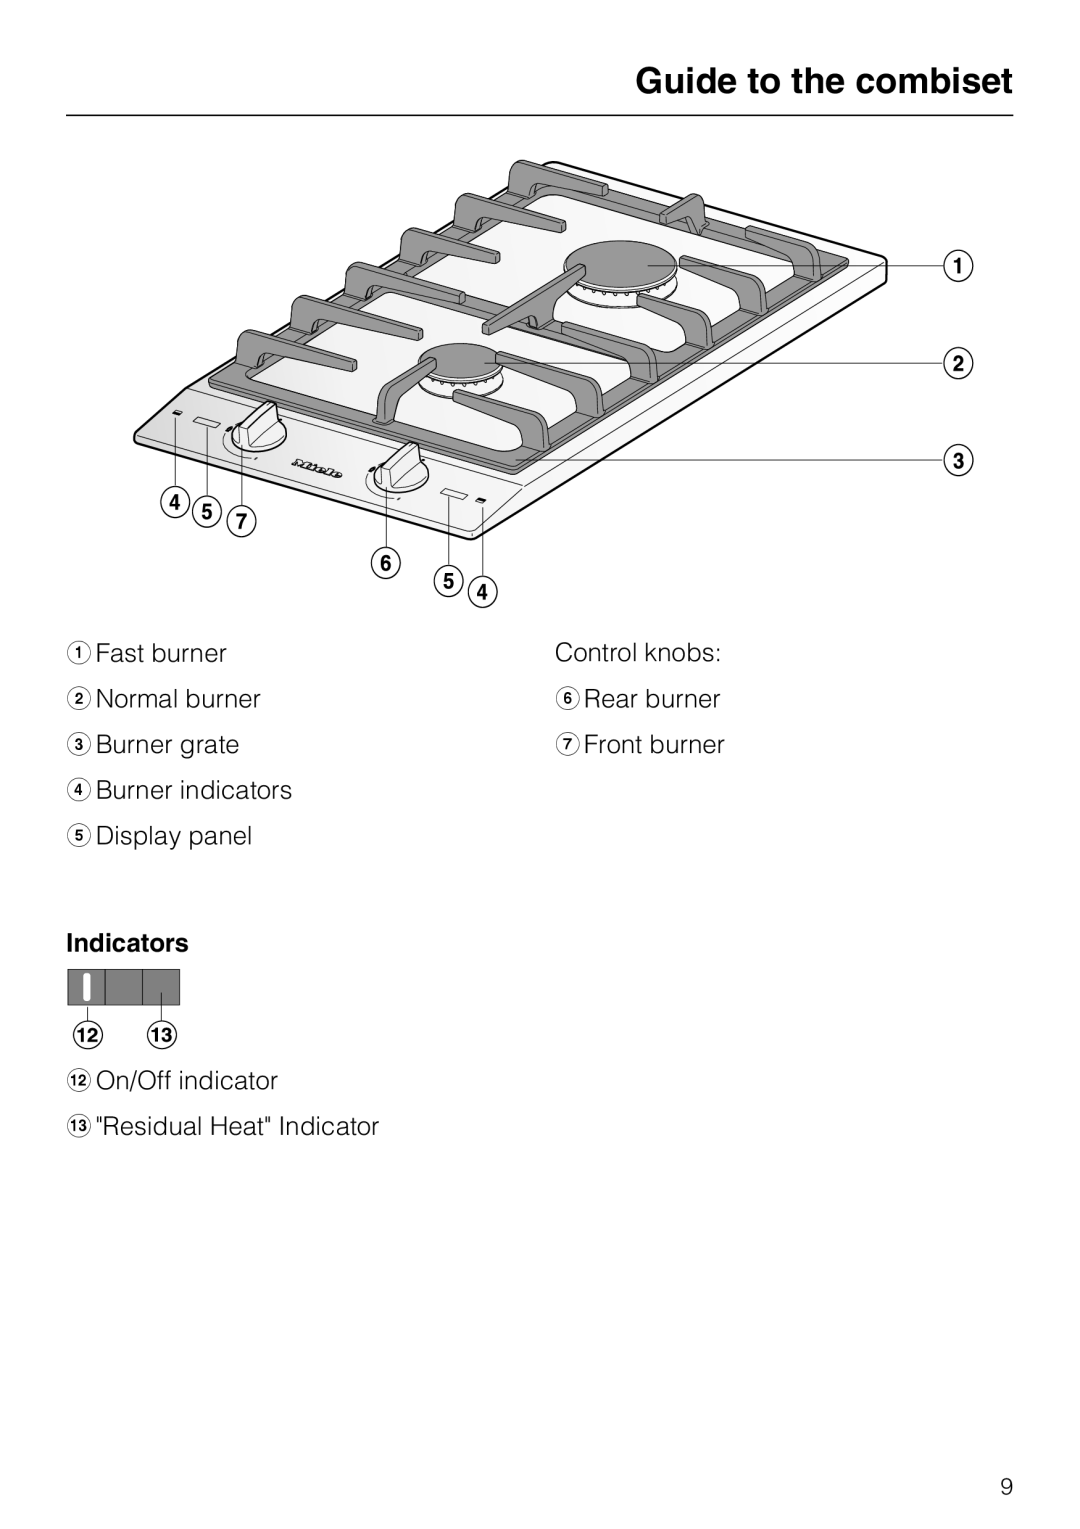 Miele CS1012 installation instructions Guide to the combiset, Indicators 